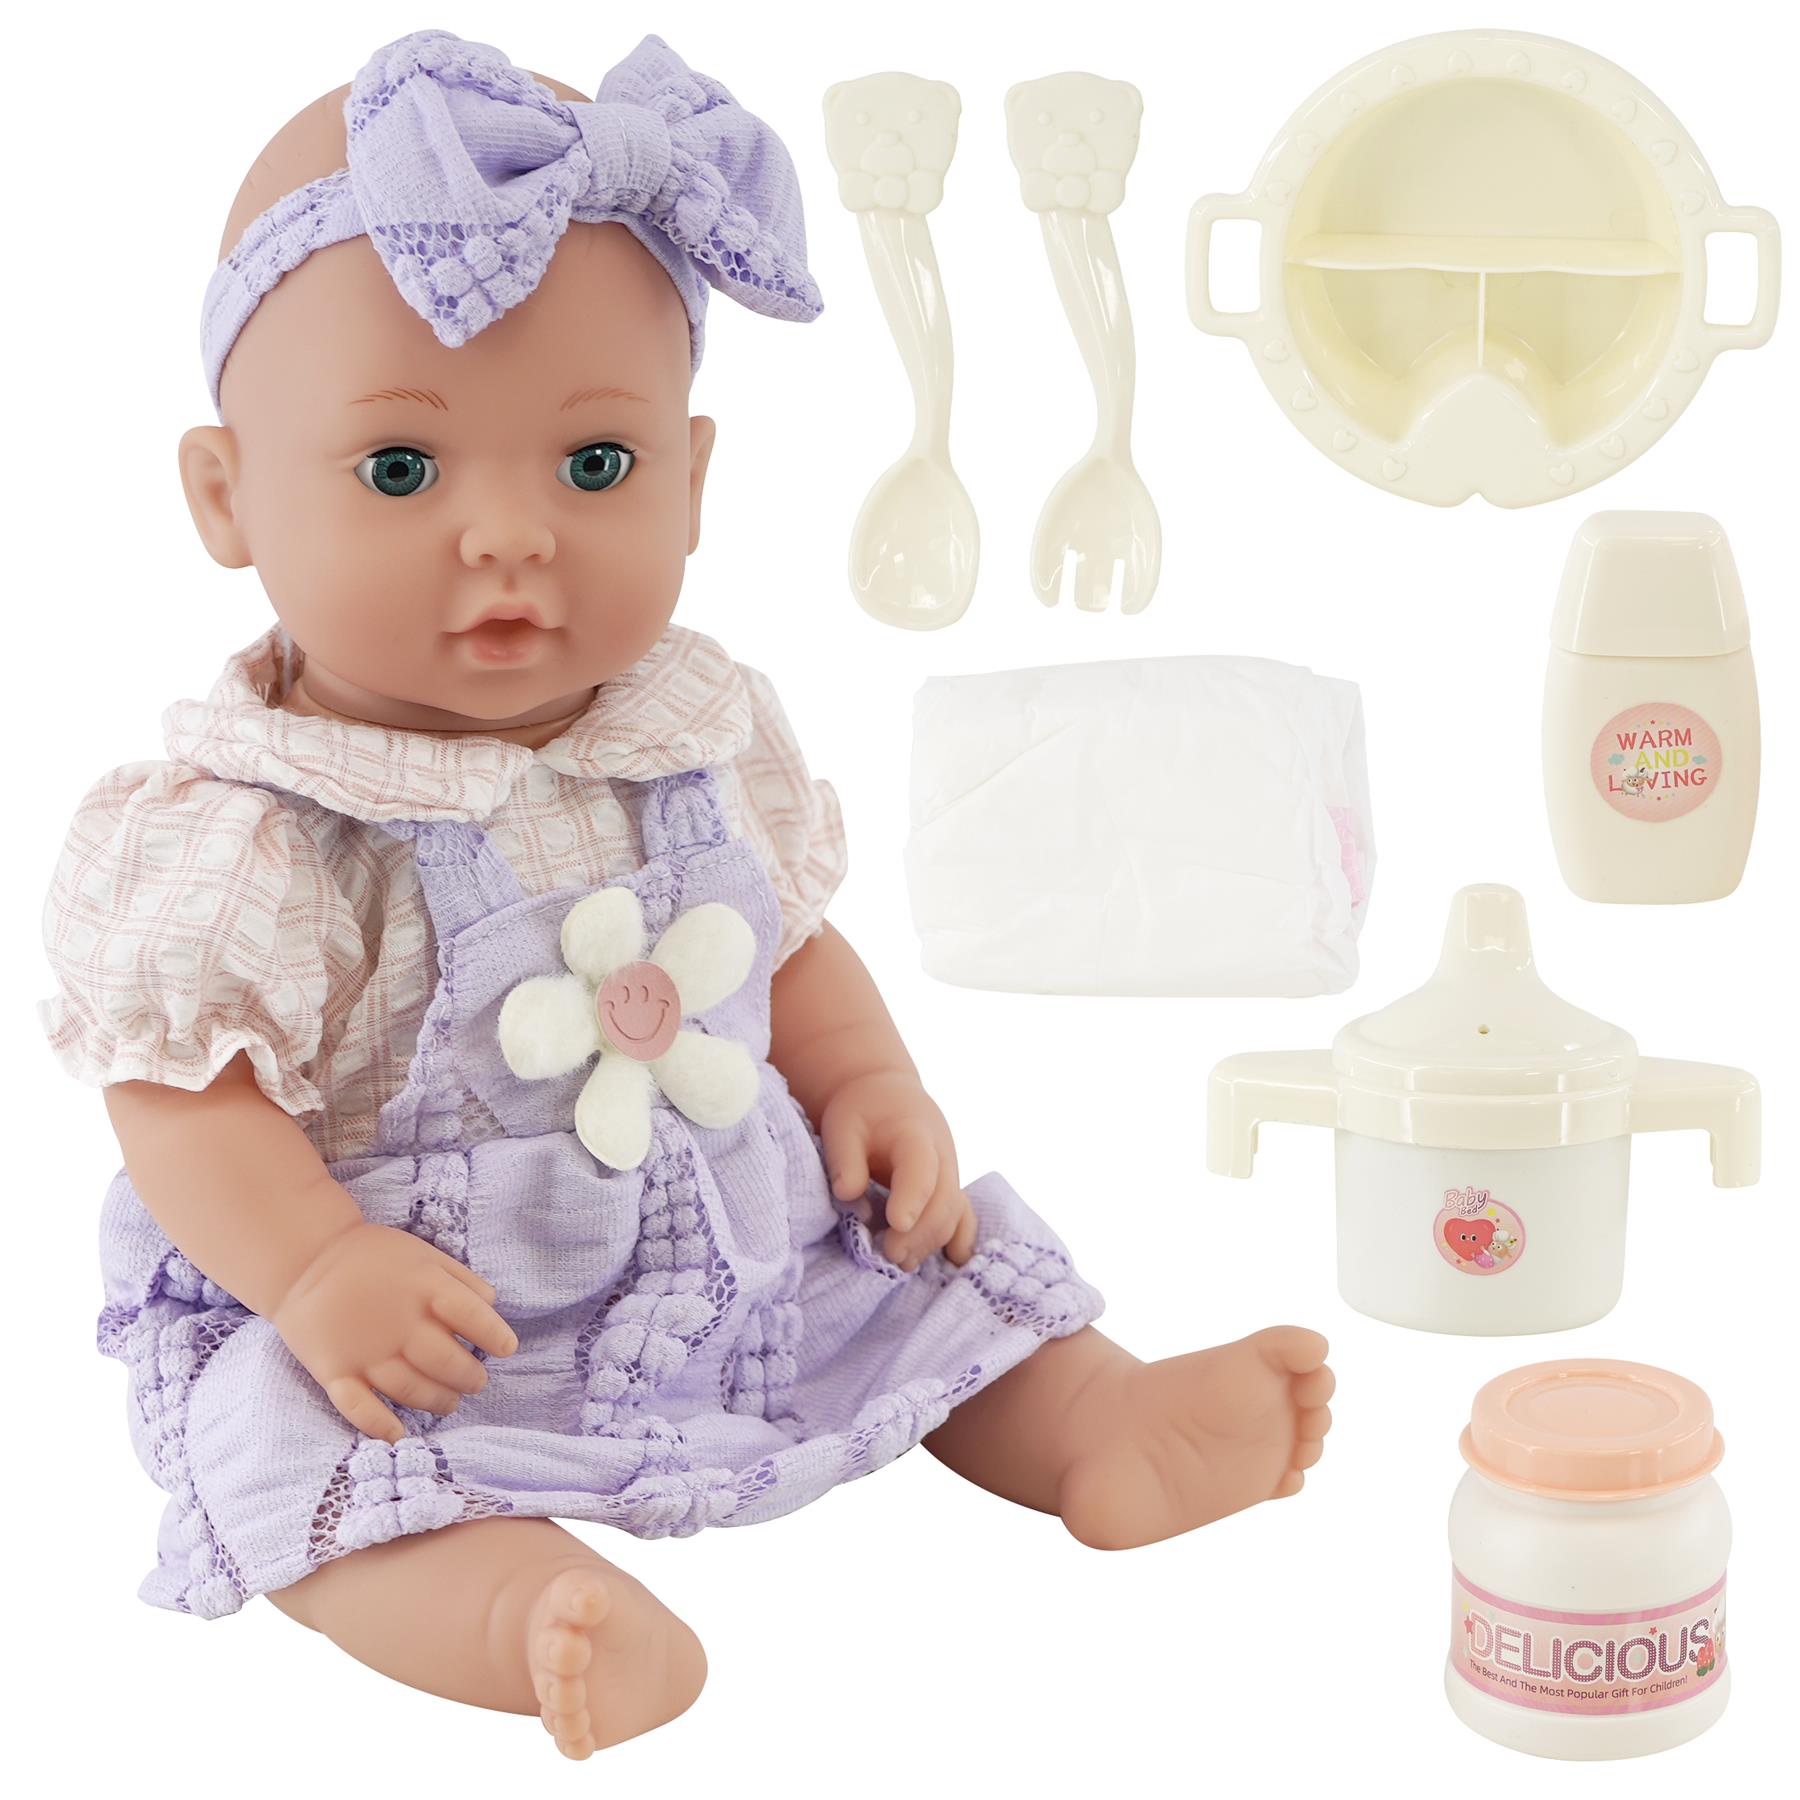 BiBi Doll Doll With Accessories 16" Baby Doll with Accessories